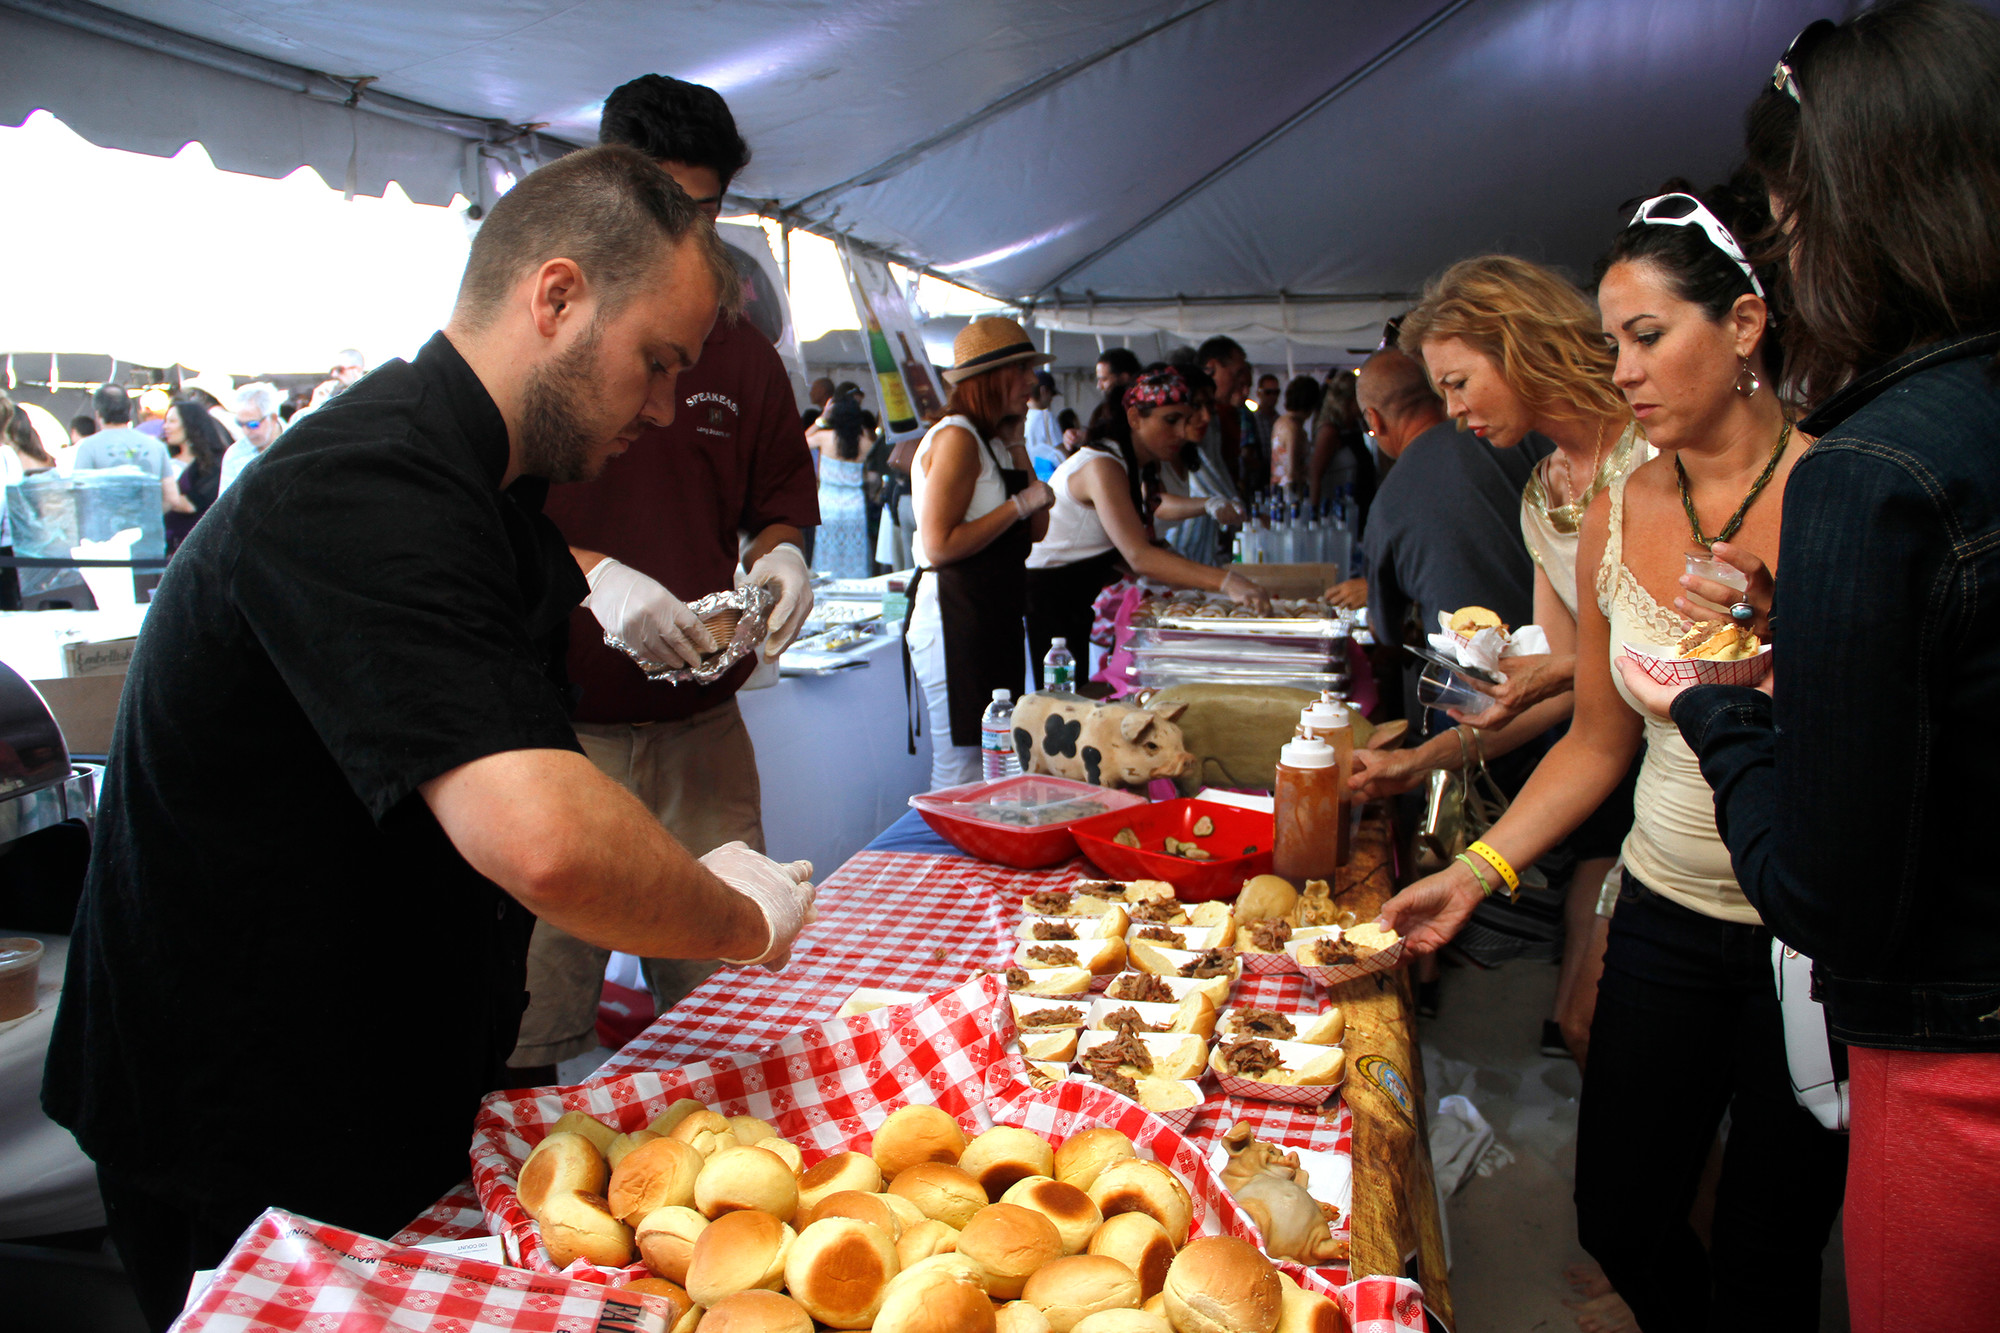 Chef Mark Watchorn of Swingbellys kept up with the high demand for samples of the restaurant’s pulled-pork sliders.